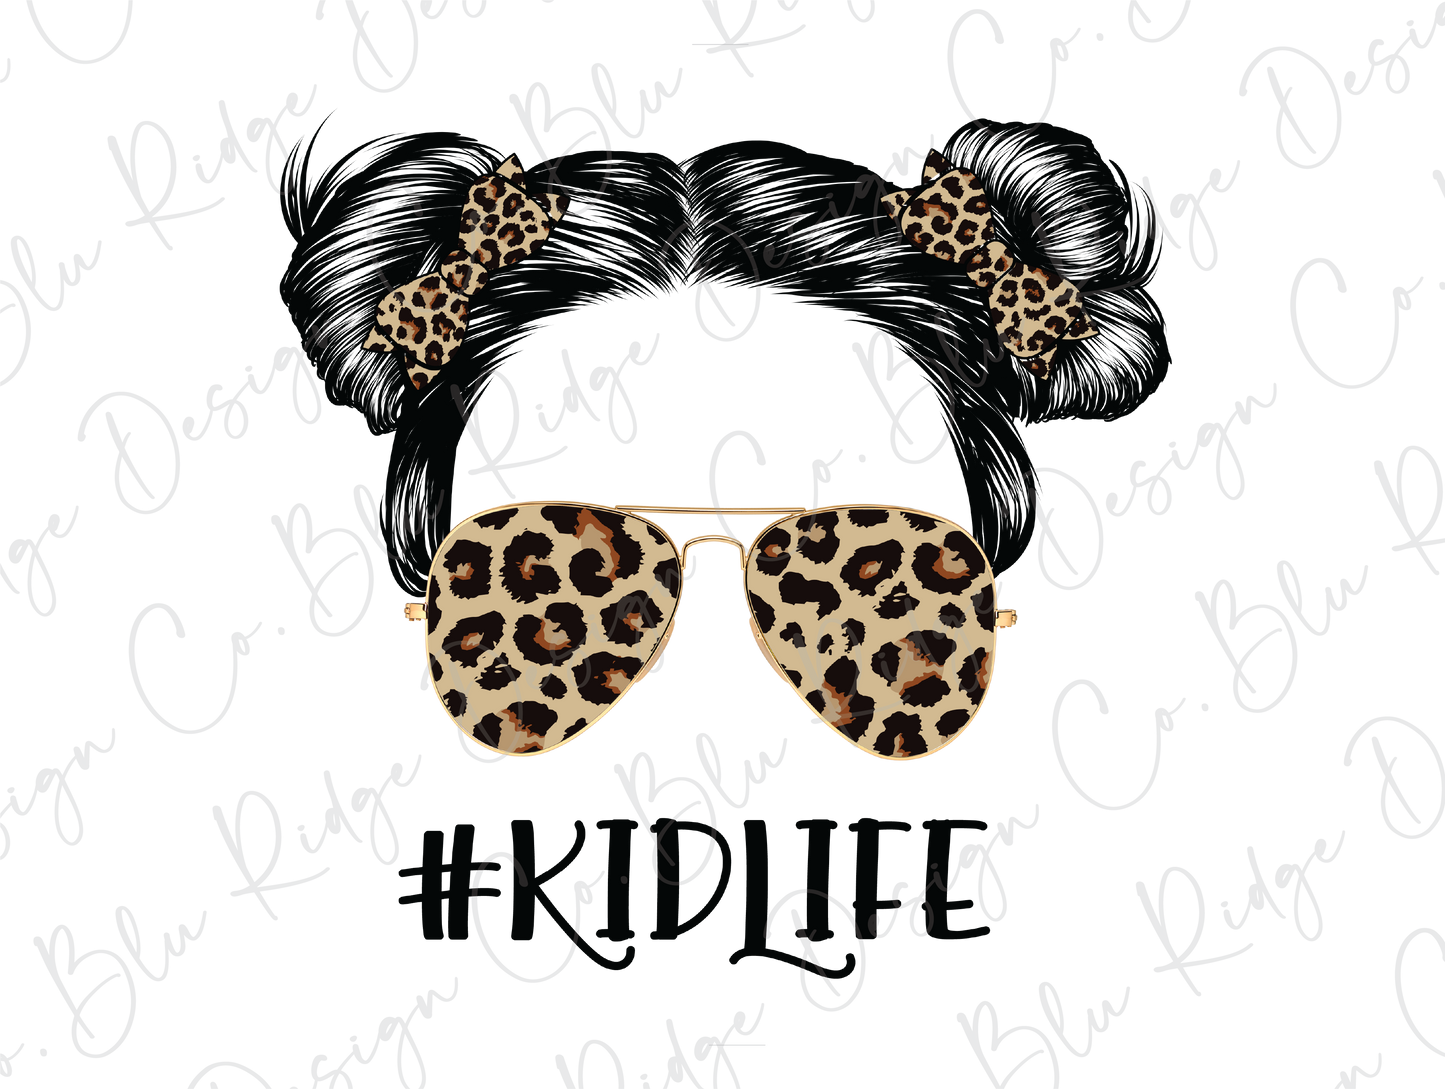 Messy Bun Kid Life Leopard Bow Sunglasses Direct to Film (DTF) Transfer